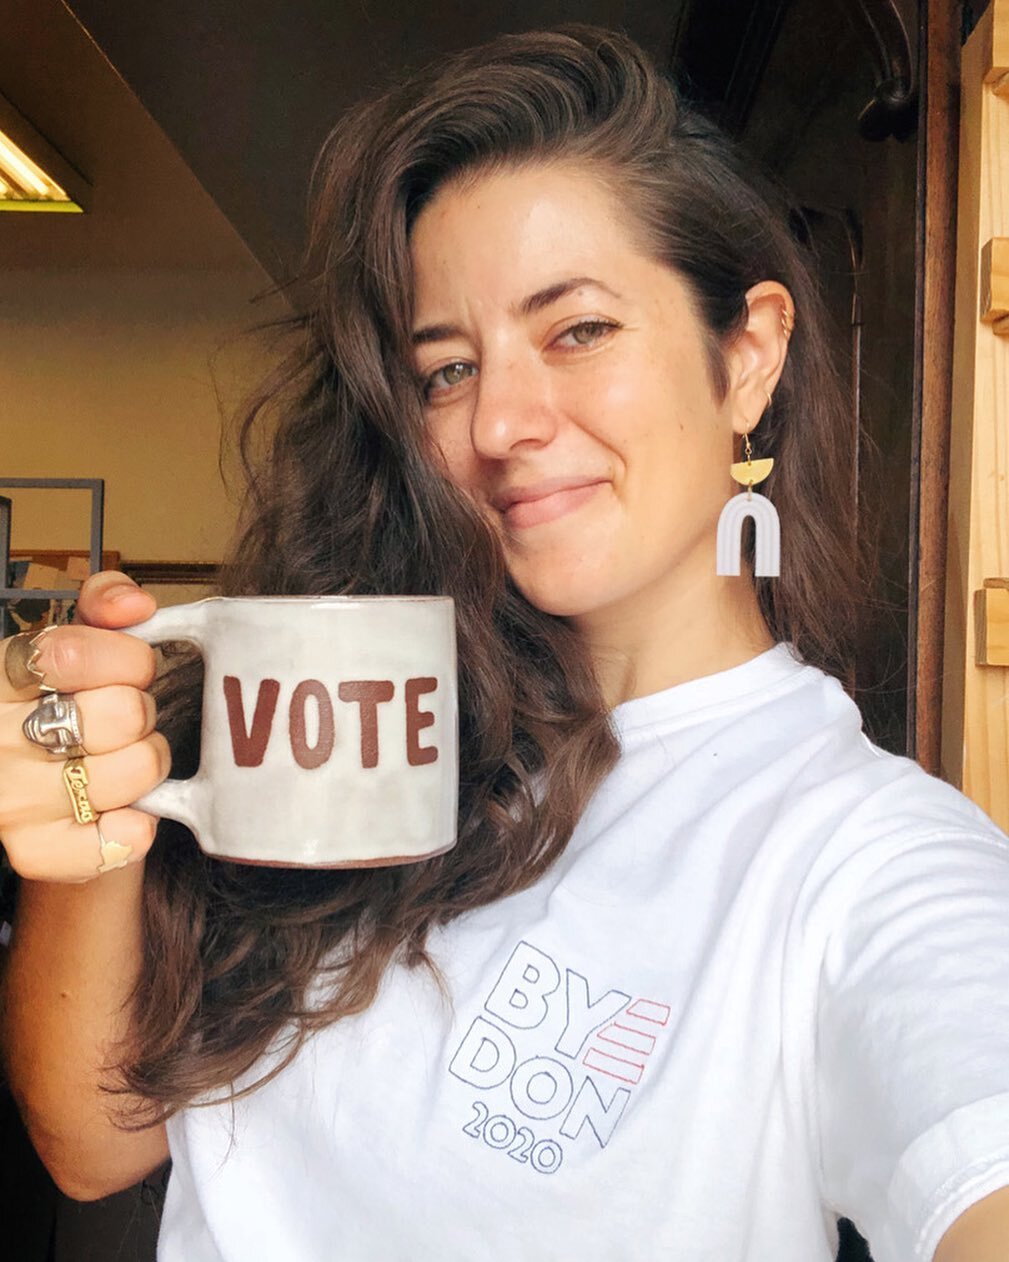 OK PEOPLE THE ELECTION IS 47 DAYS AWAY﻿. Grab my brand new (limited edition!) Vote Mug, put on a @read_receipts vote shirt, and, in the words of @patagonia, let&rsquo;s vote the assholes out. 

**UPDATE: SOLD OUT!! Will try and get some more up soon!